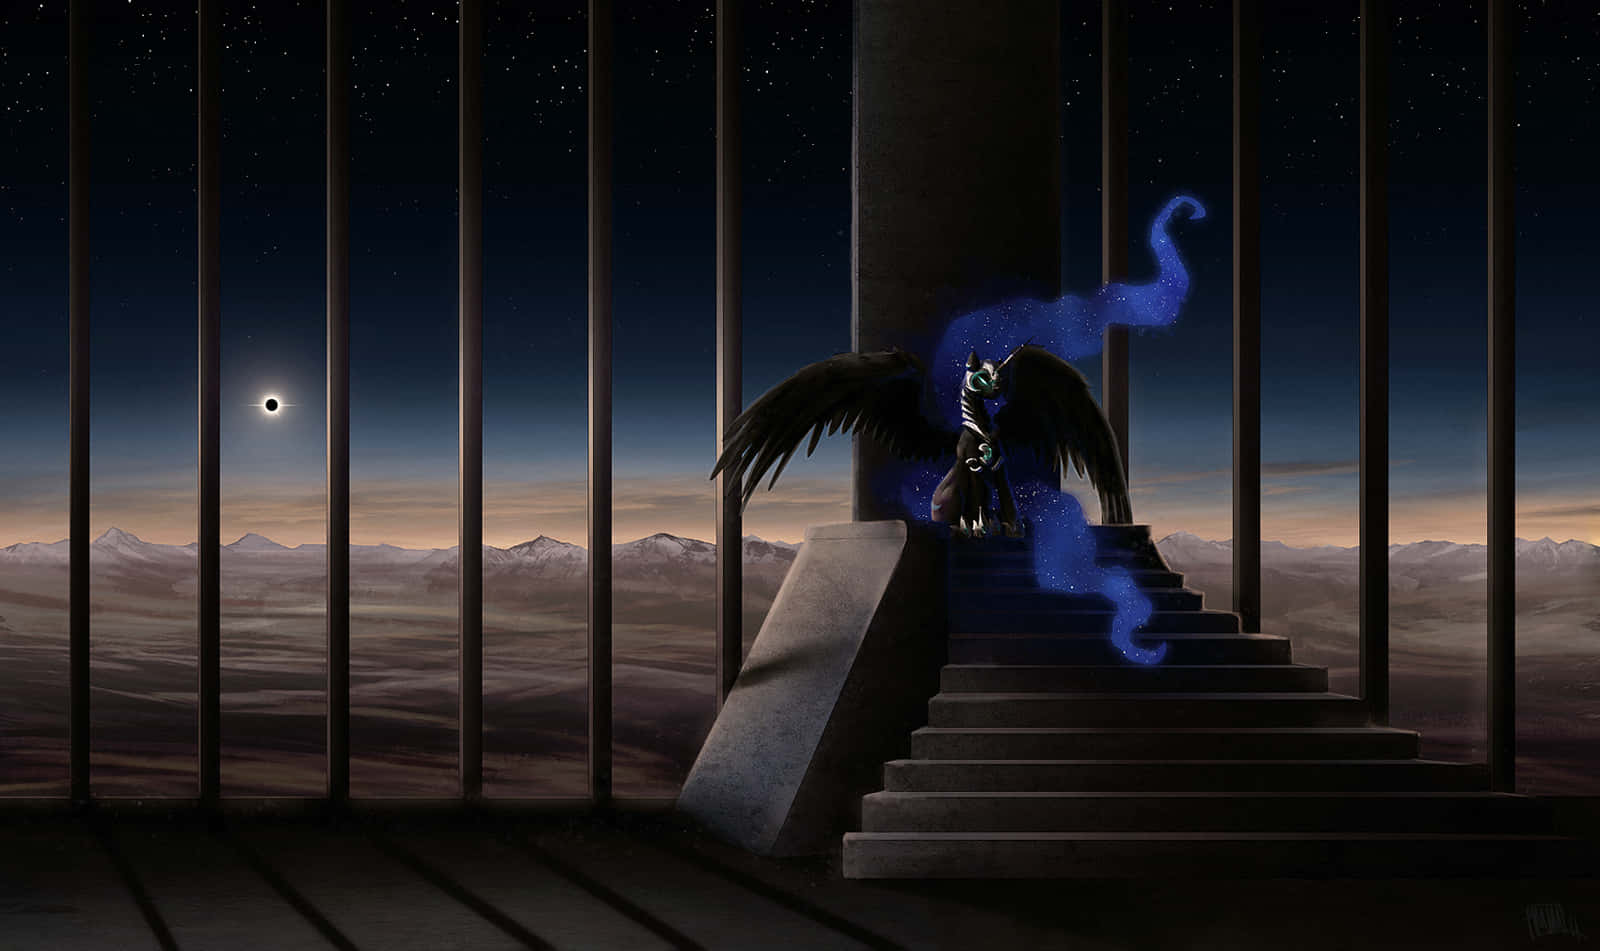 A Blue Dragon Sitting On A Stairway With A Blue Sky Background